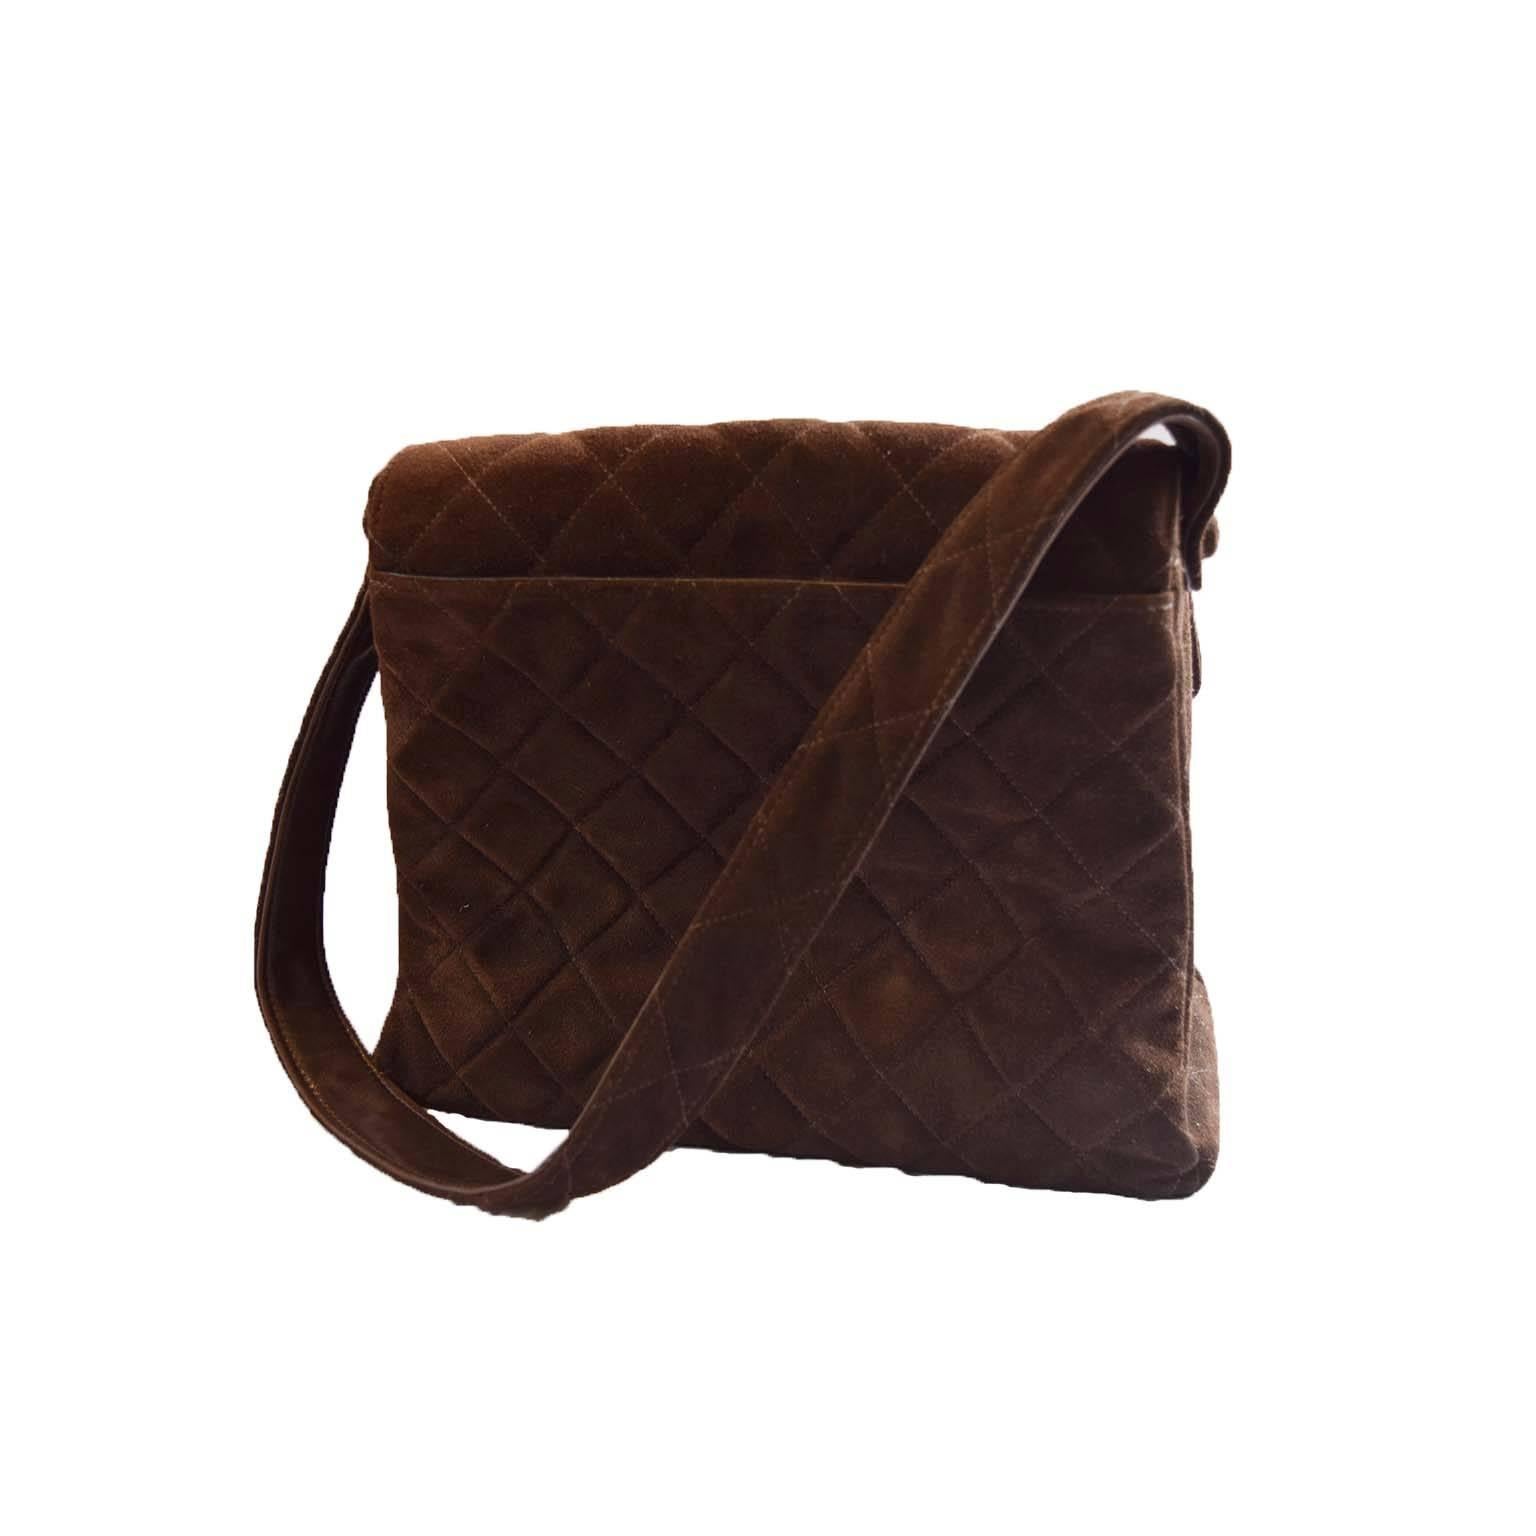 Chanel vintage brown suede handbag with flap & shoulder strap. Serial no. 5109878. Soft suede with diamond quilted pattern with gold hardware. Flat base. 2 main interior compartments as well as a smaller side pocket & one zippered compartment. Comes